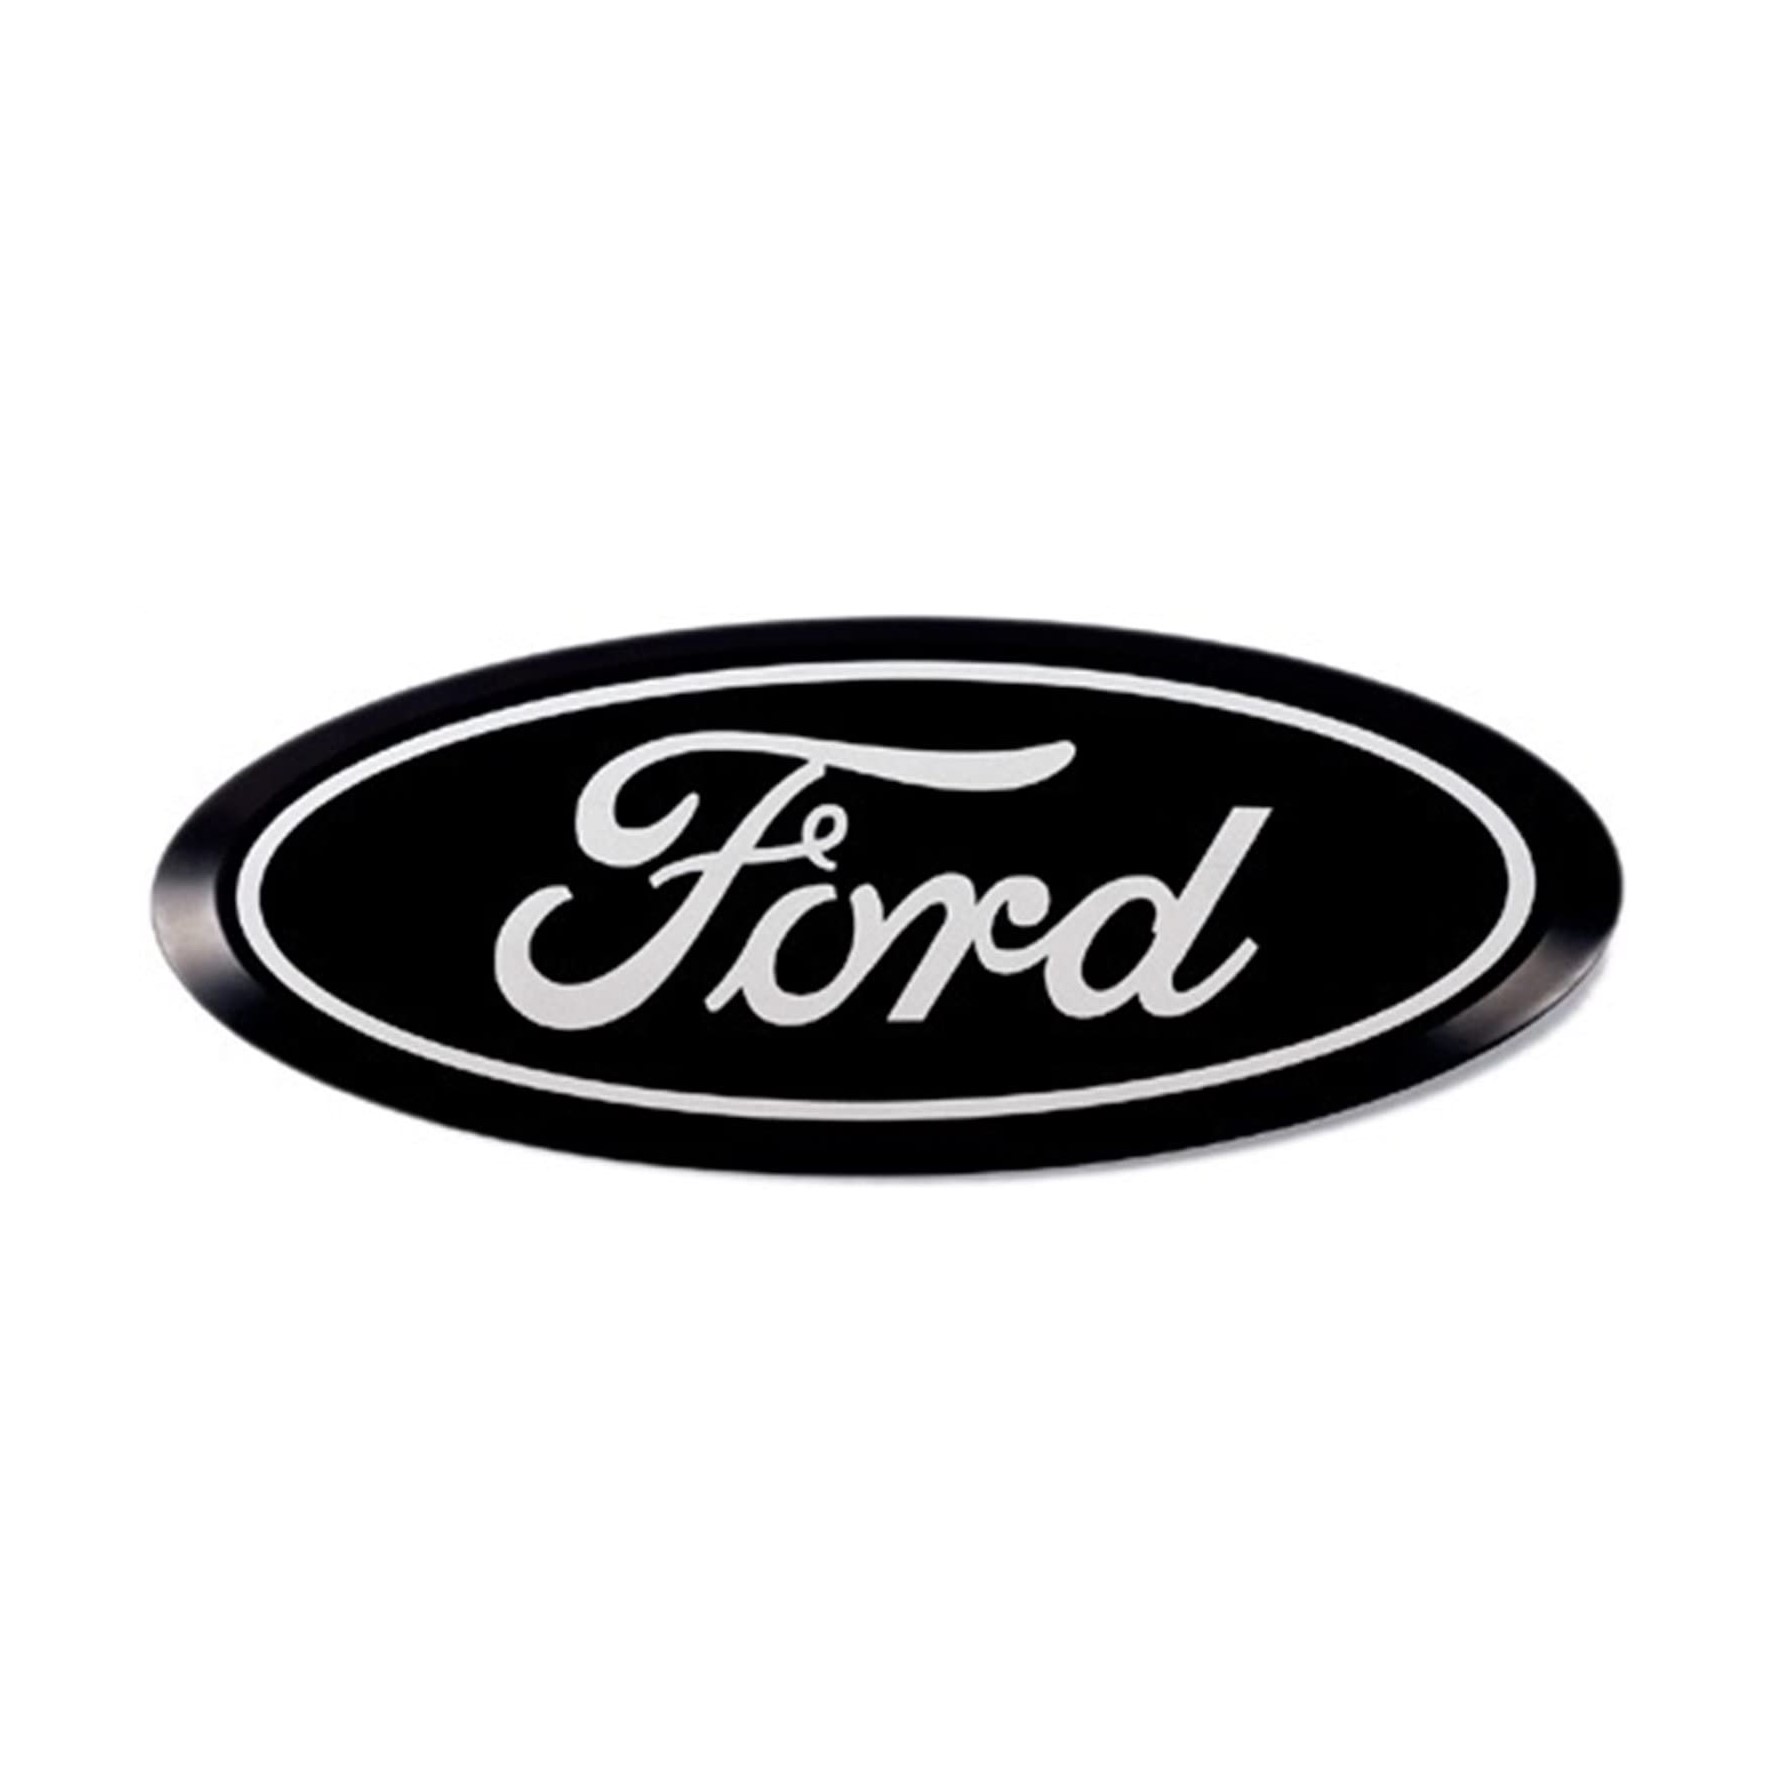 Ford F-150 old steel logo, Ford Oval, Ford Motors Logo, Ford